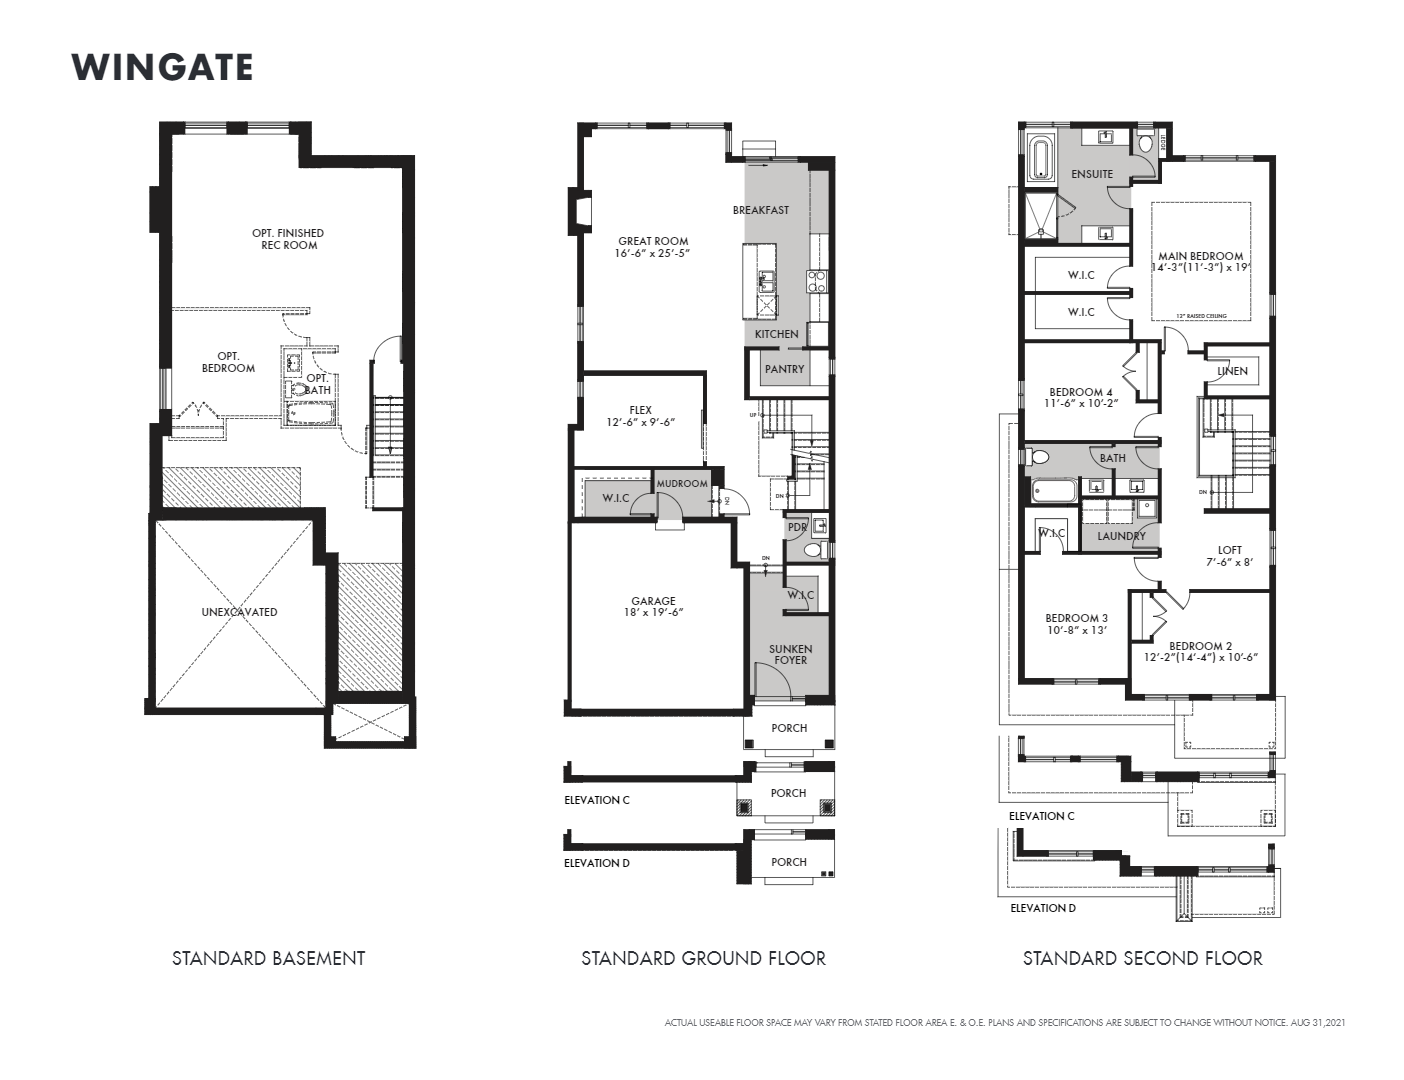 Wingate Floor Plan of Riverside South Richcraft Homes with undefined beds